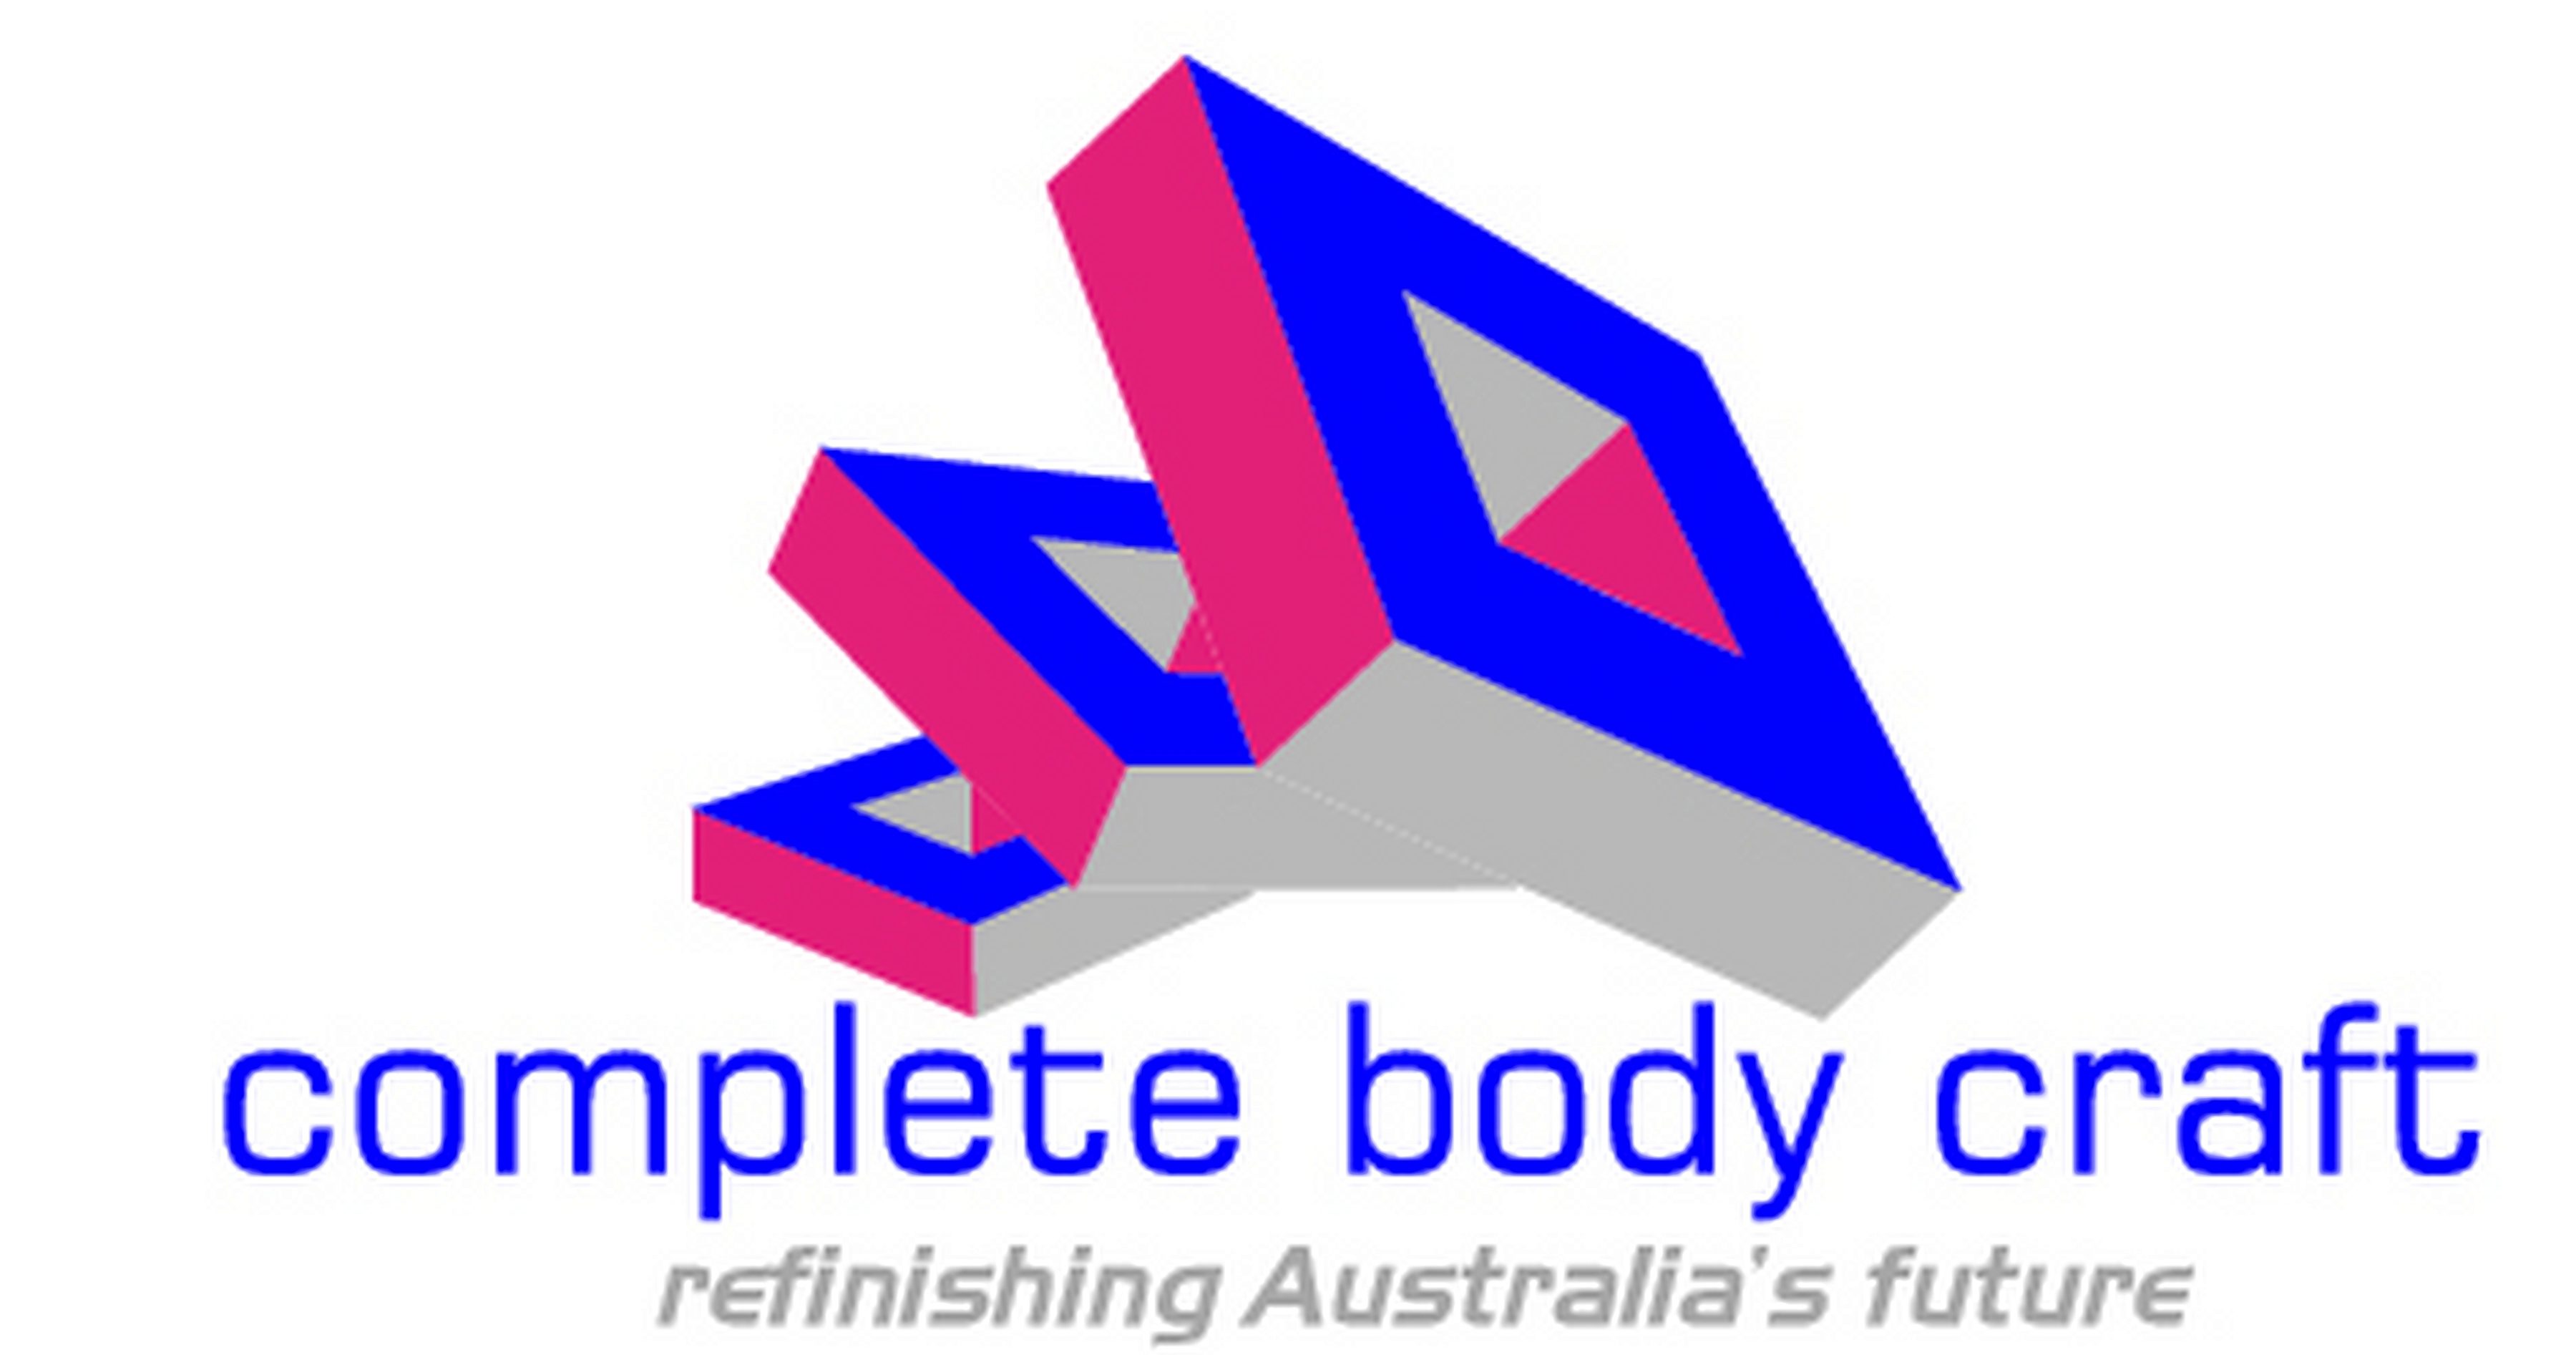 COMPLETE BODY CRAFT